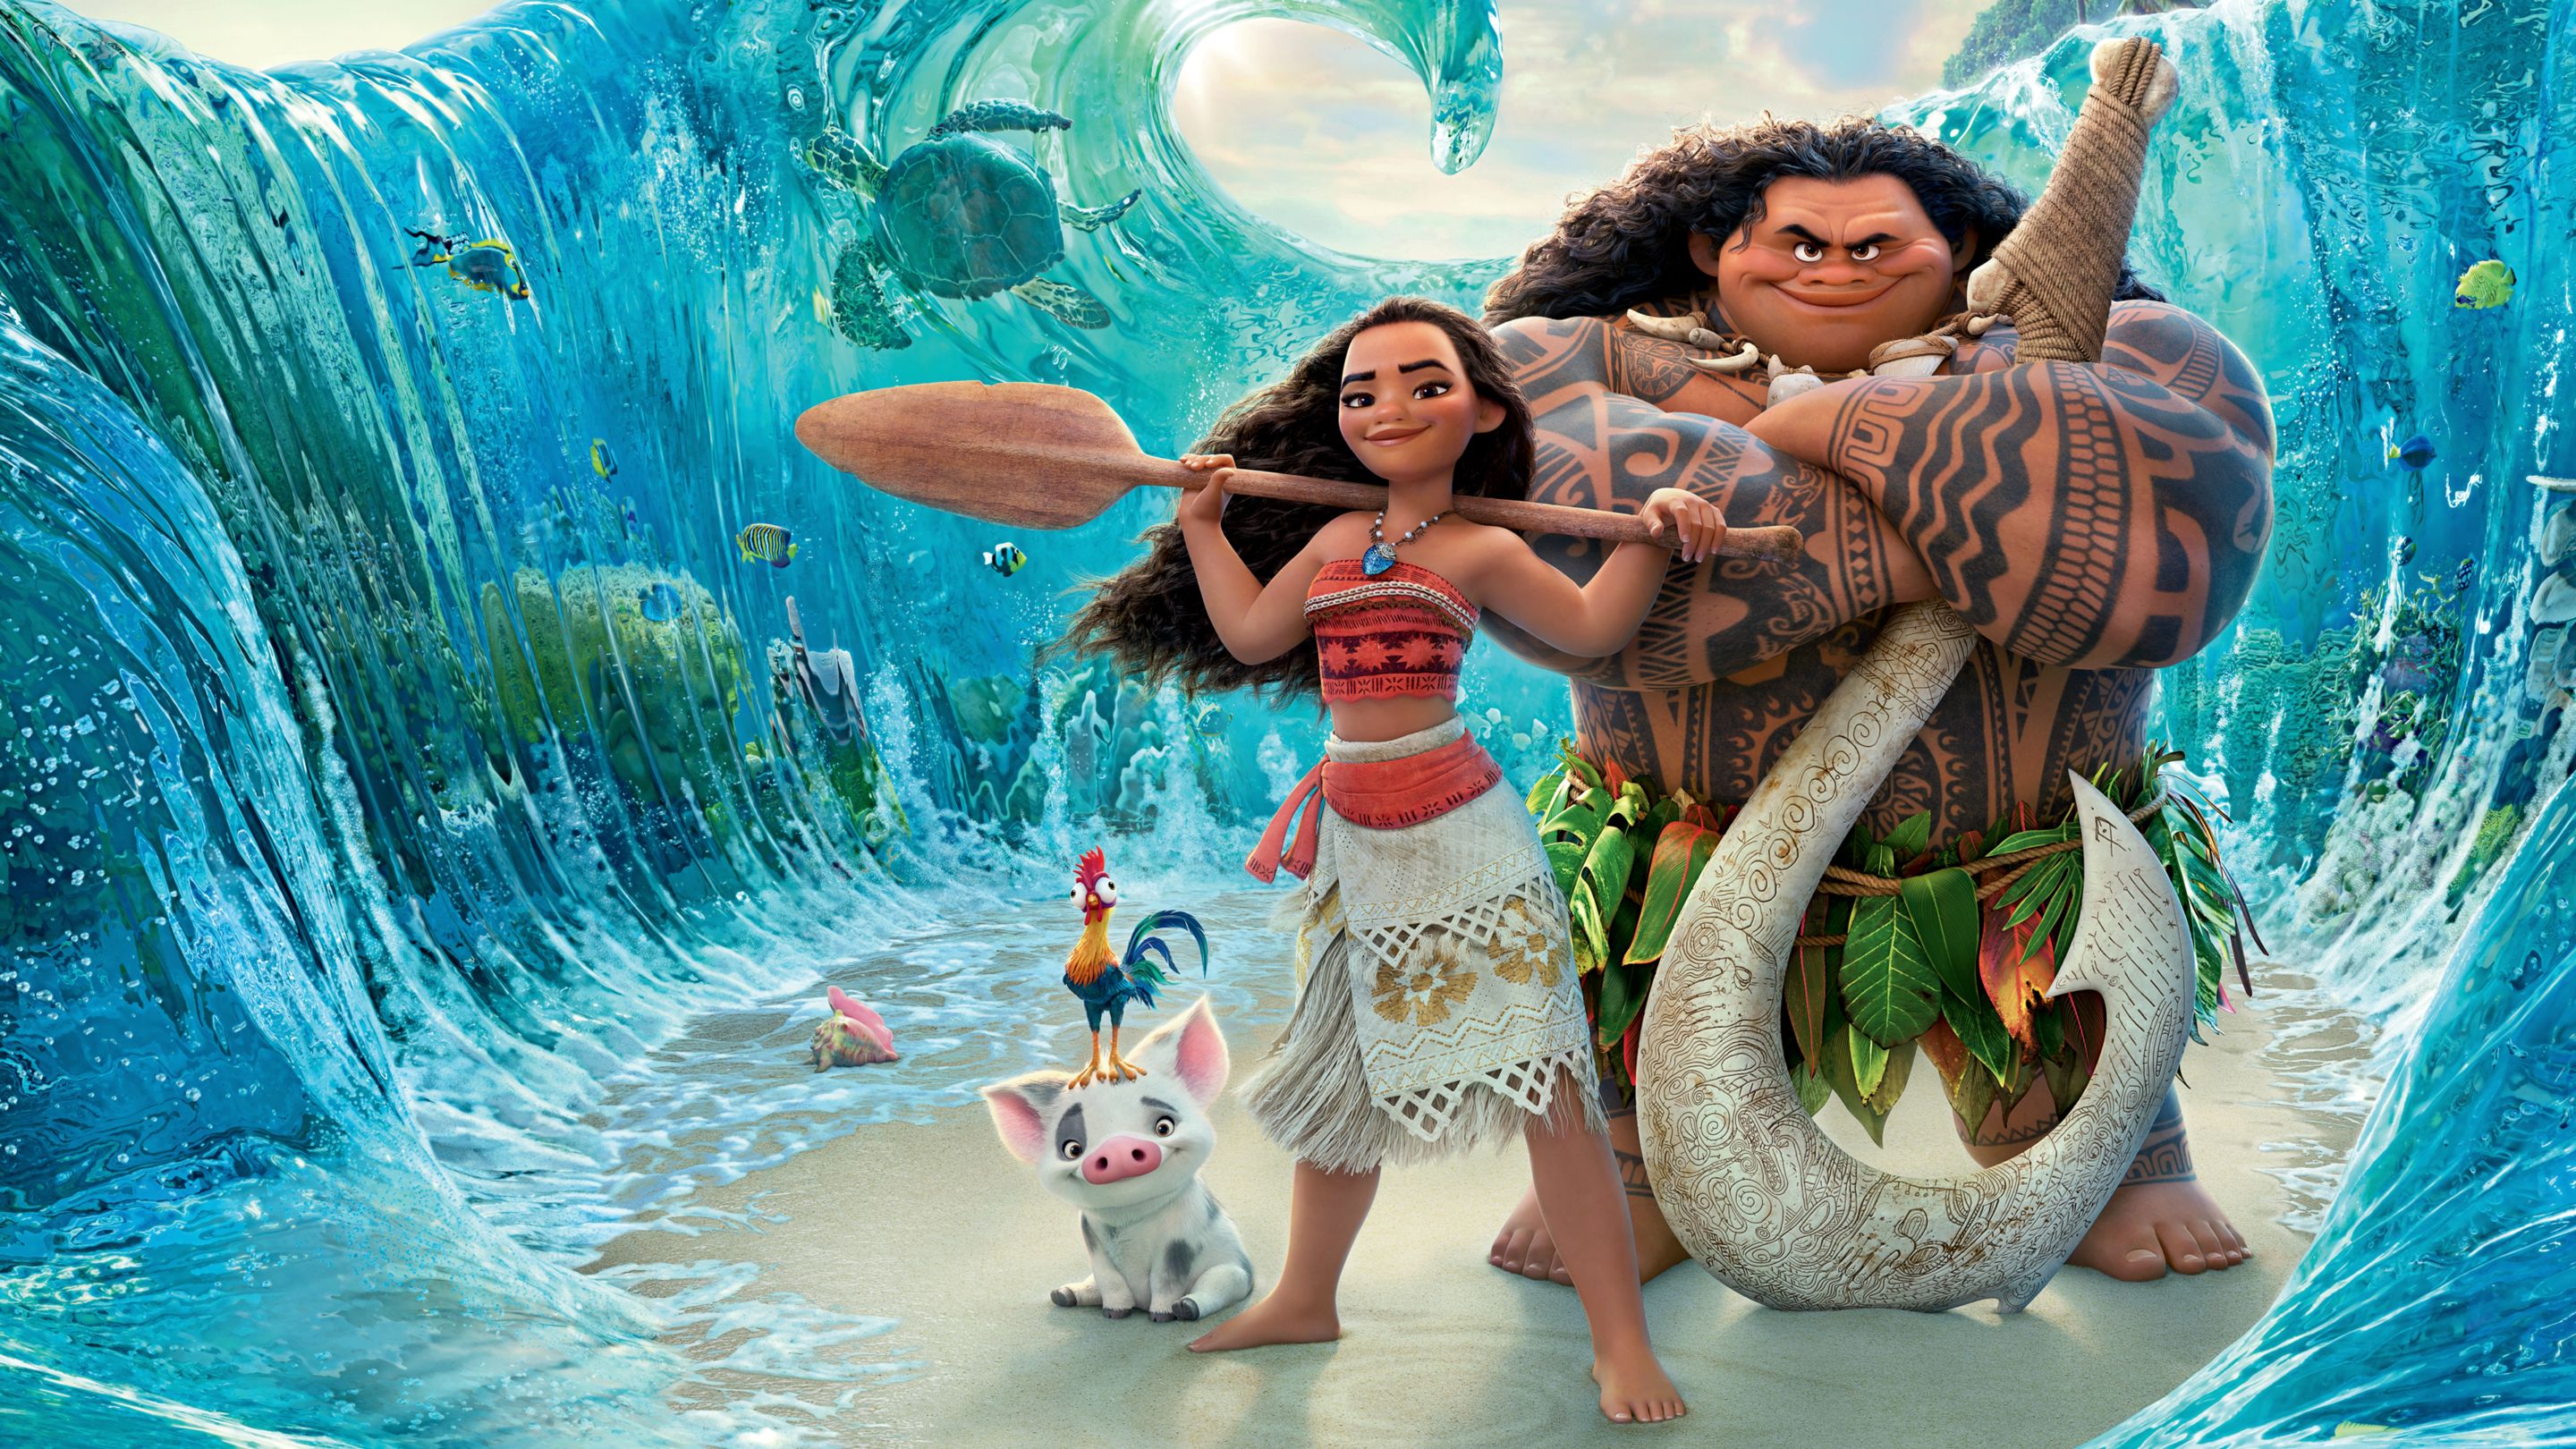 15 Greatest 2010's Disney Movies, Ranked By IMDb Ratings